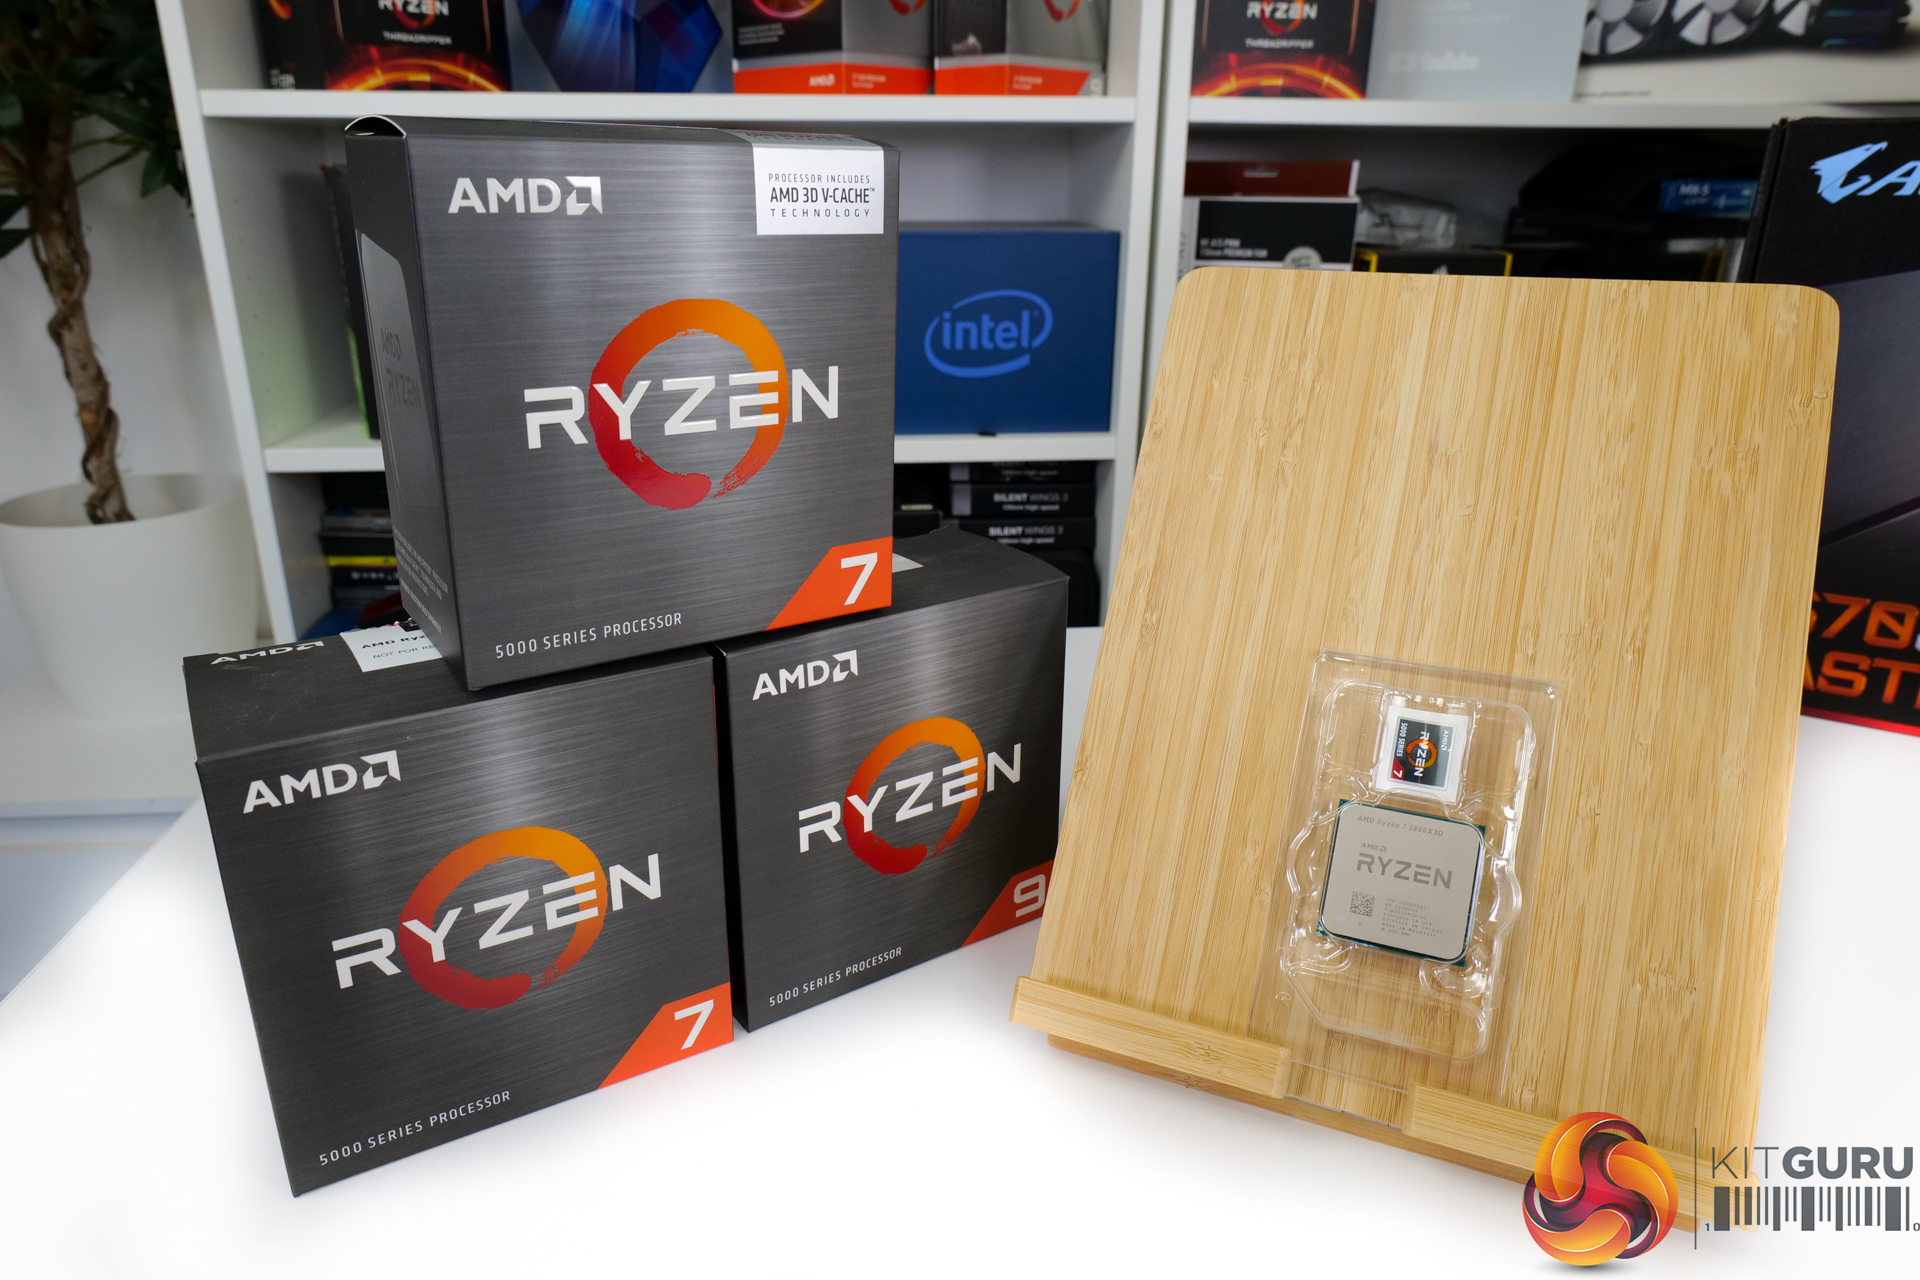 AMD Ryzen 7 5800X3D Processor Review - What does 3D V-Cache bring to the  table? - The Tech Revolutionist